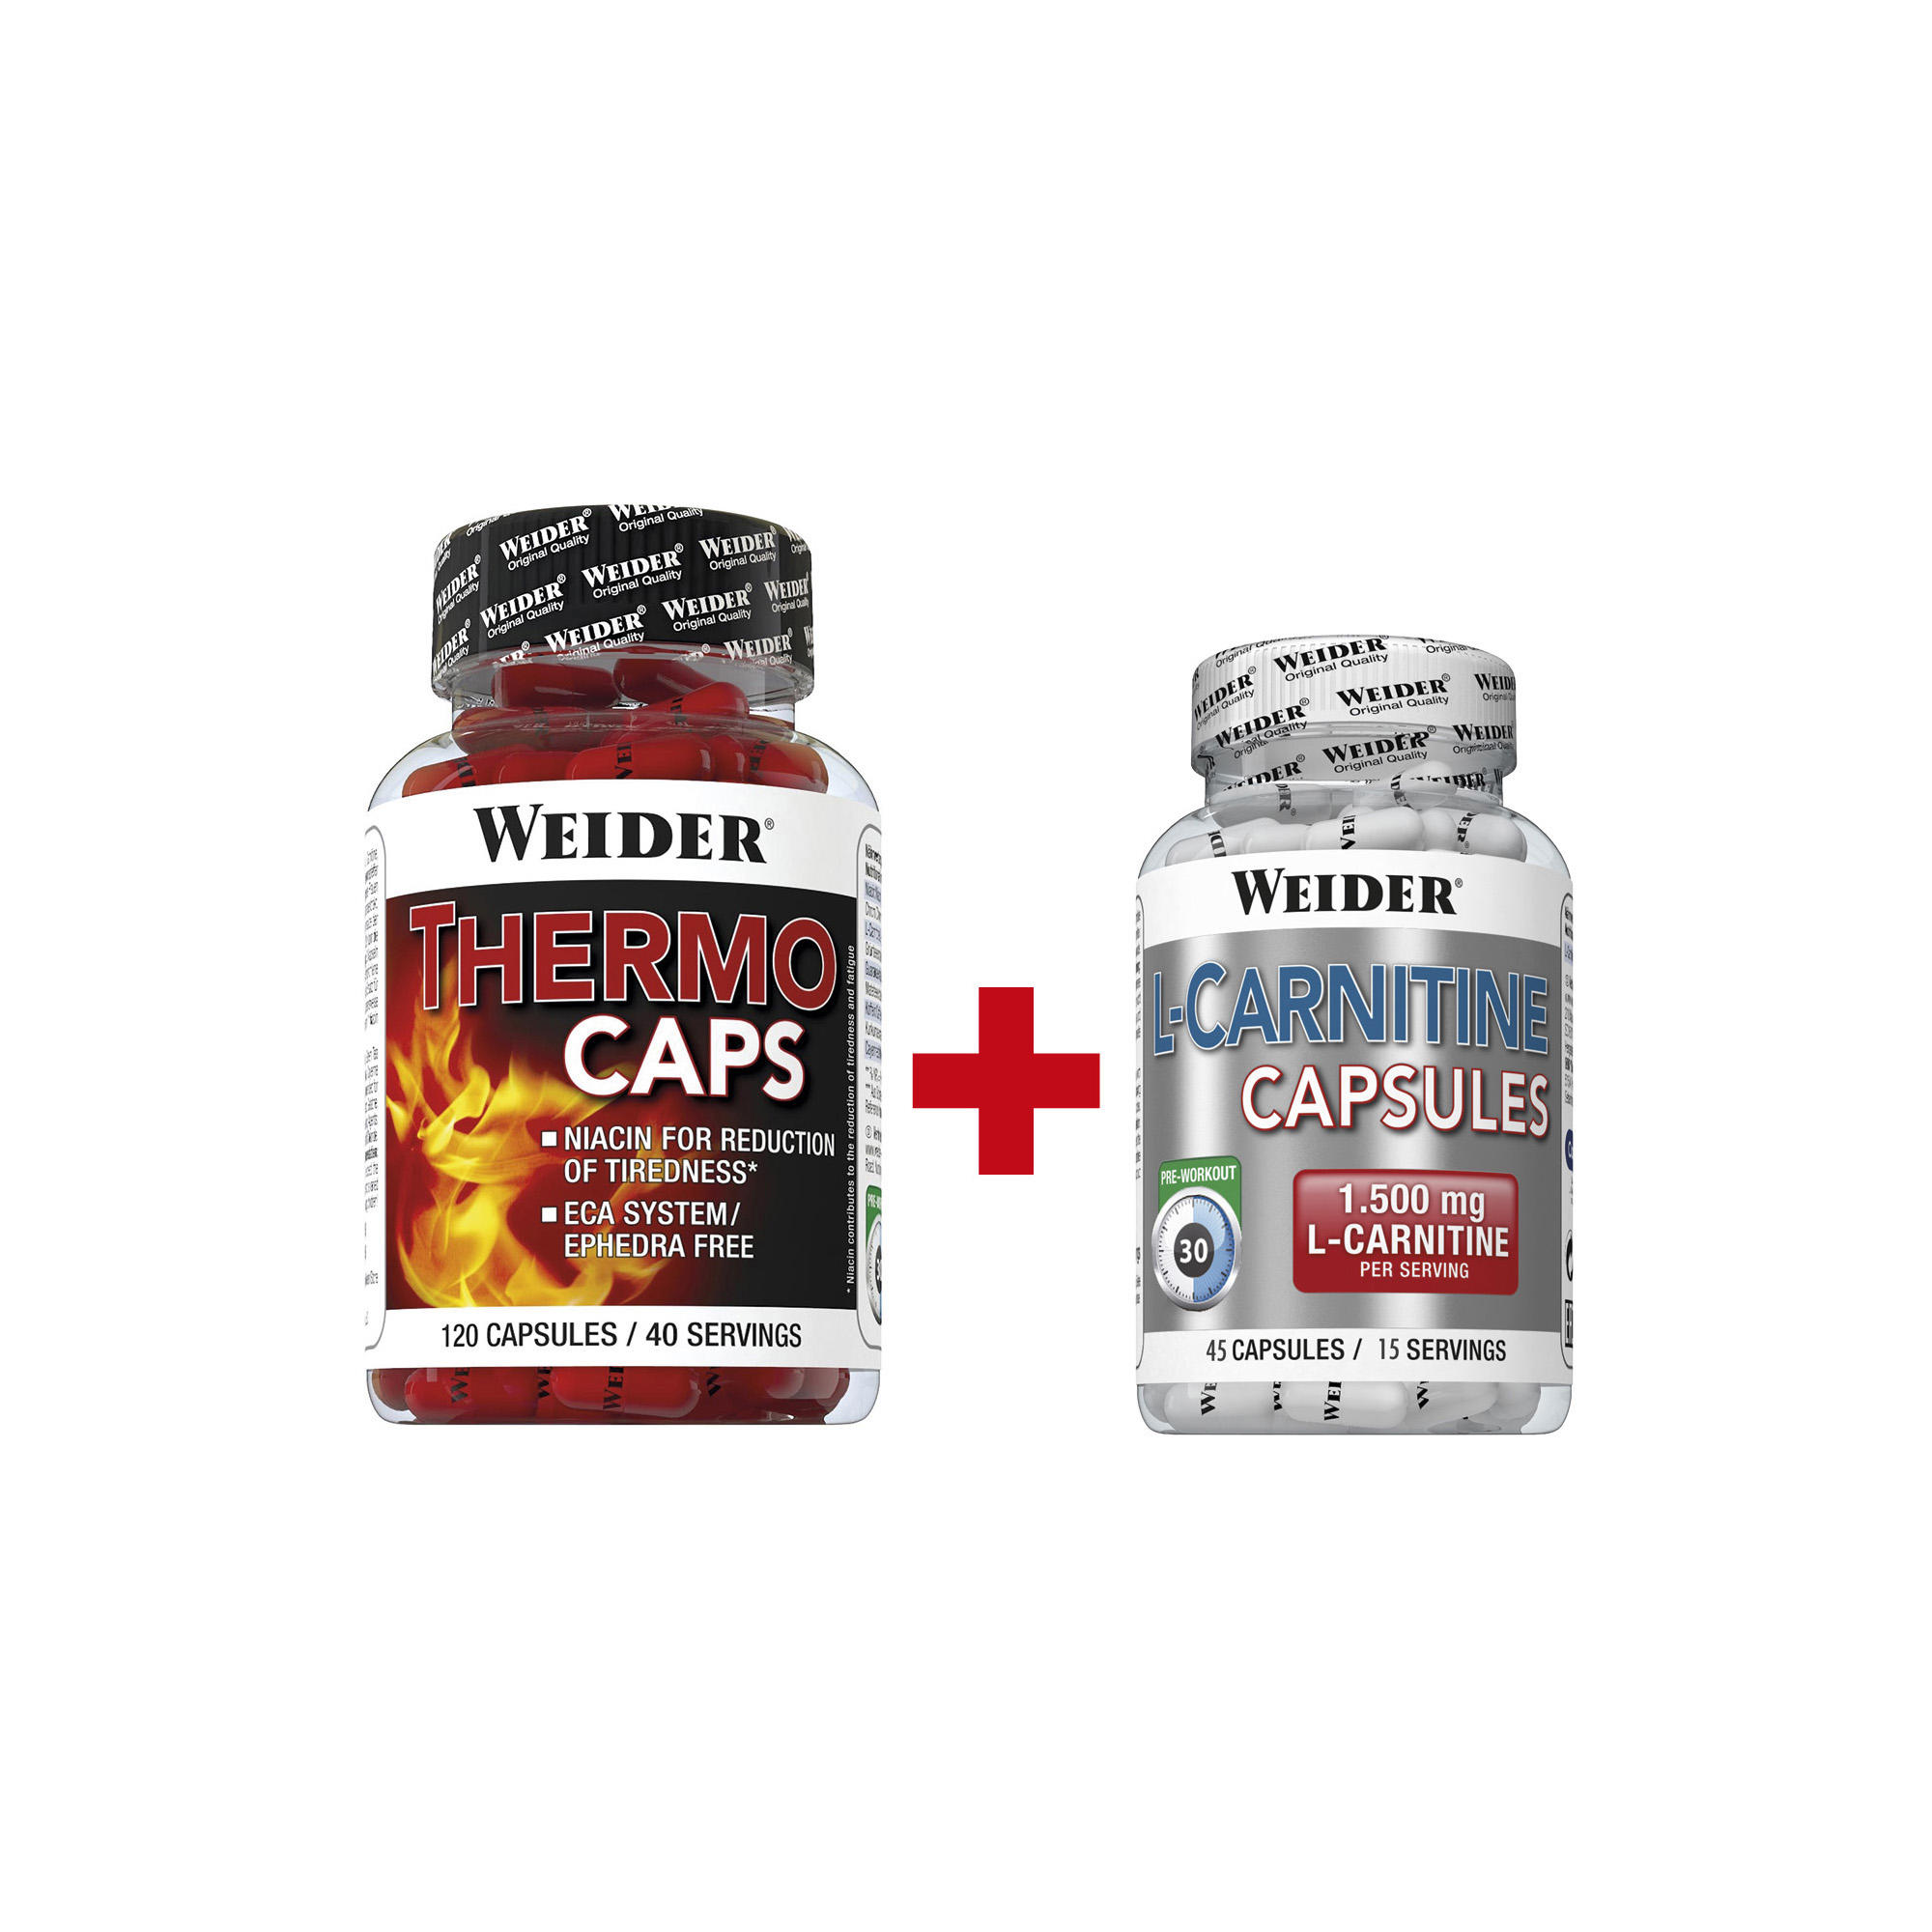 WEIDER Weider Thermocaps 120 Capsules + L-Carnitine 45 Capsules Dietary Supplement